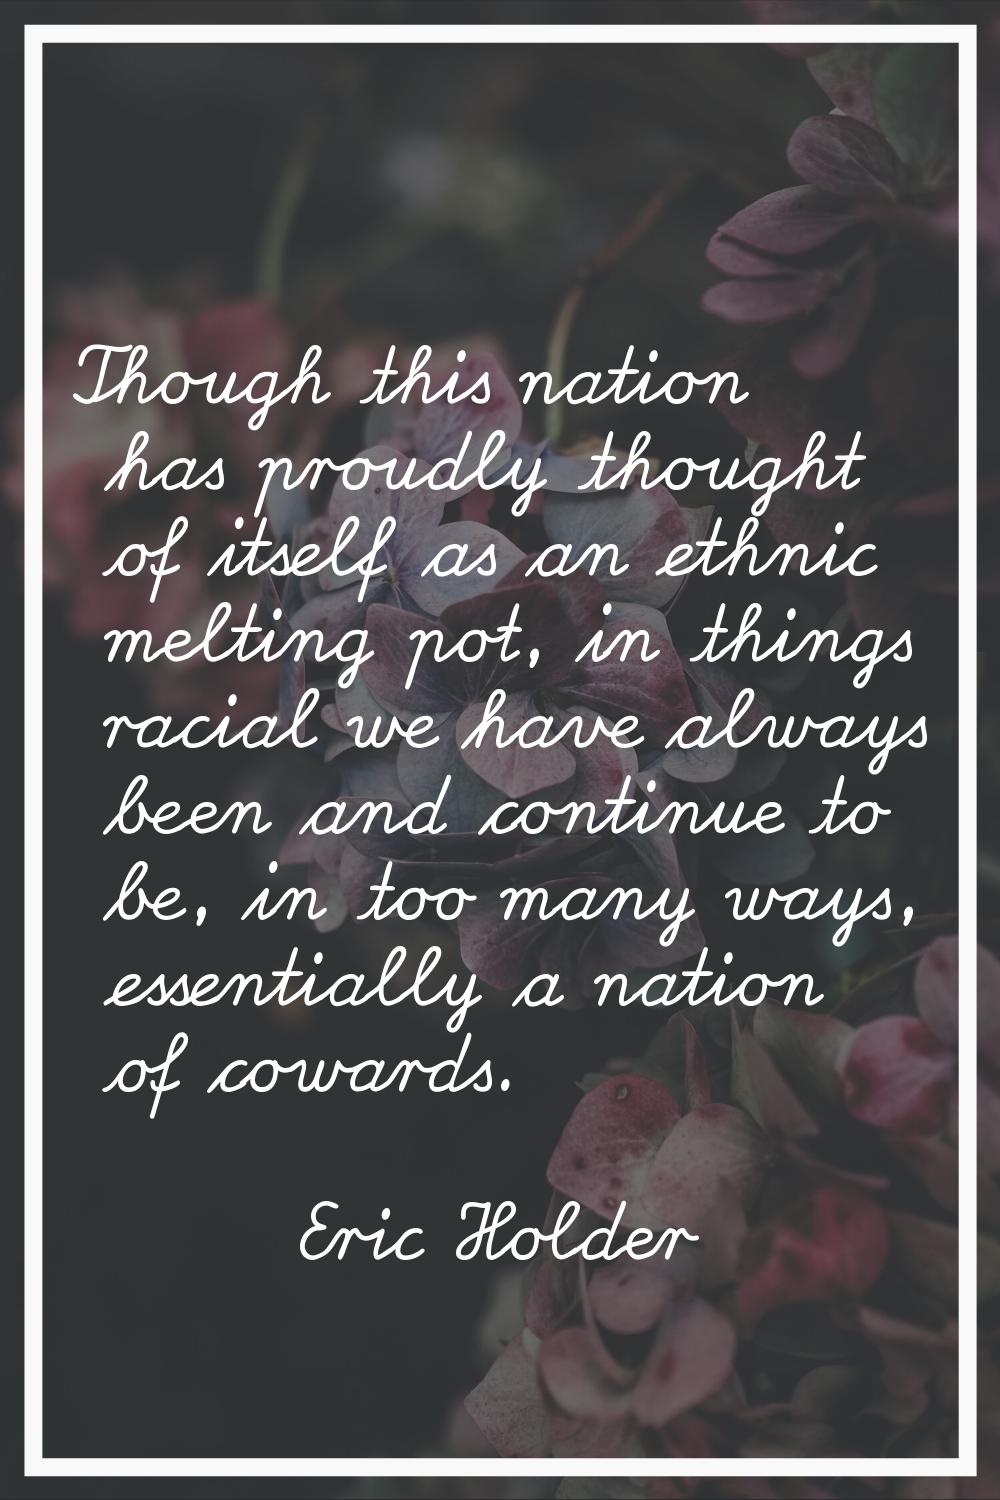 Though this nation has proudly thought of itself as an ethnic melting pot, in things racial we have